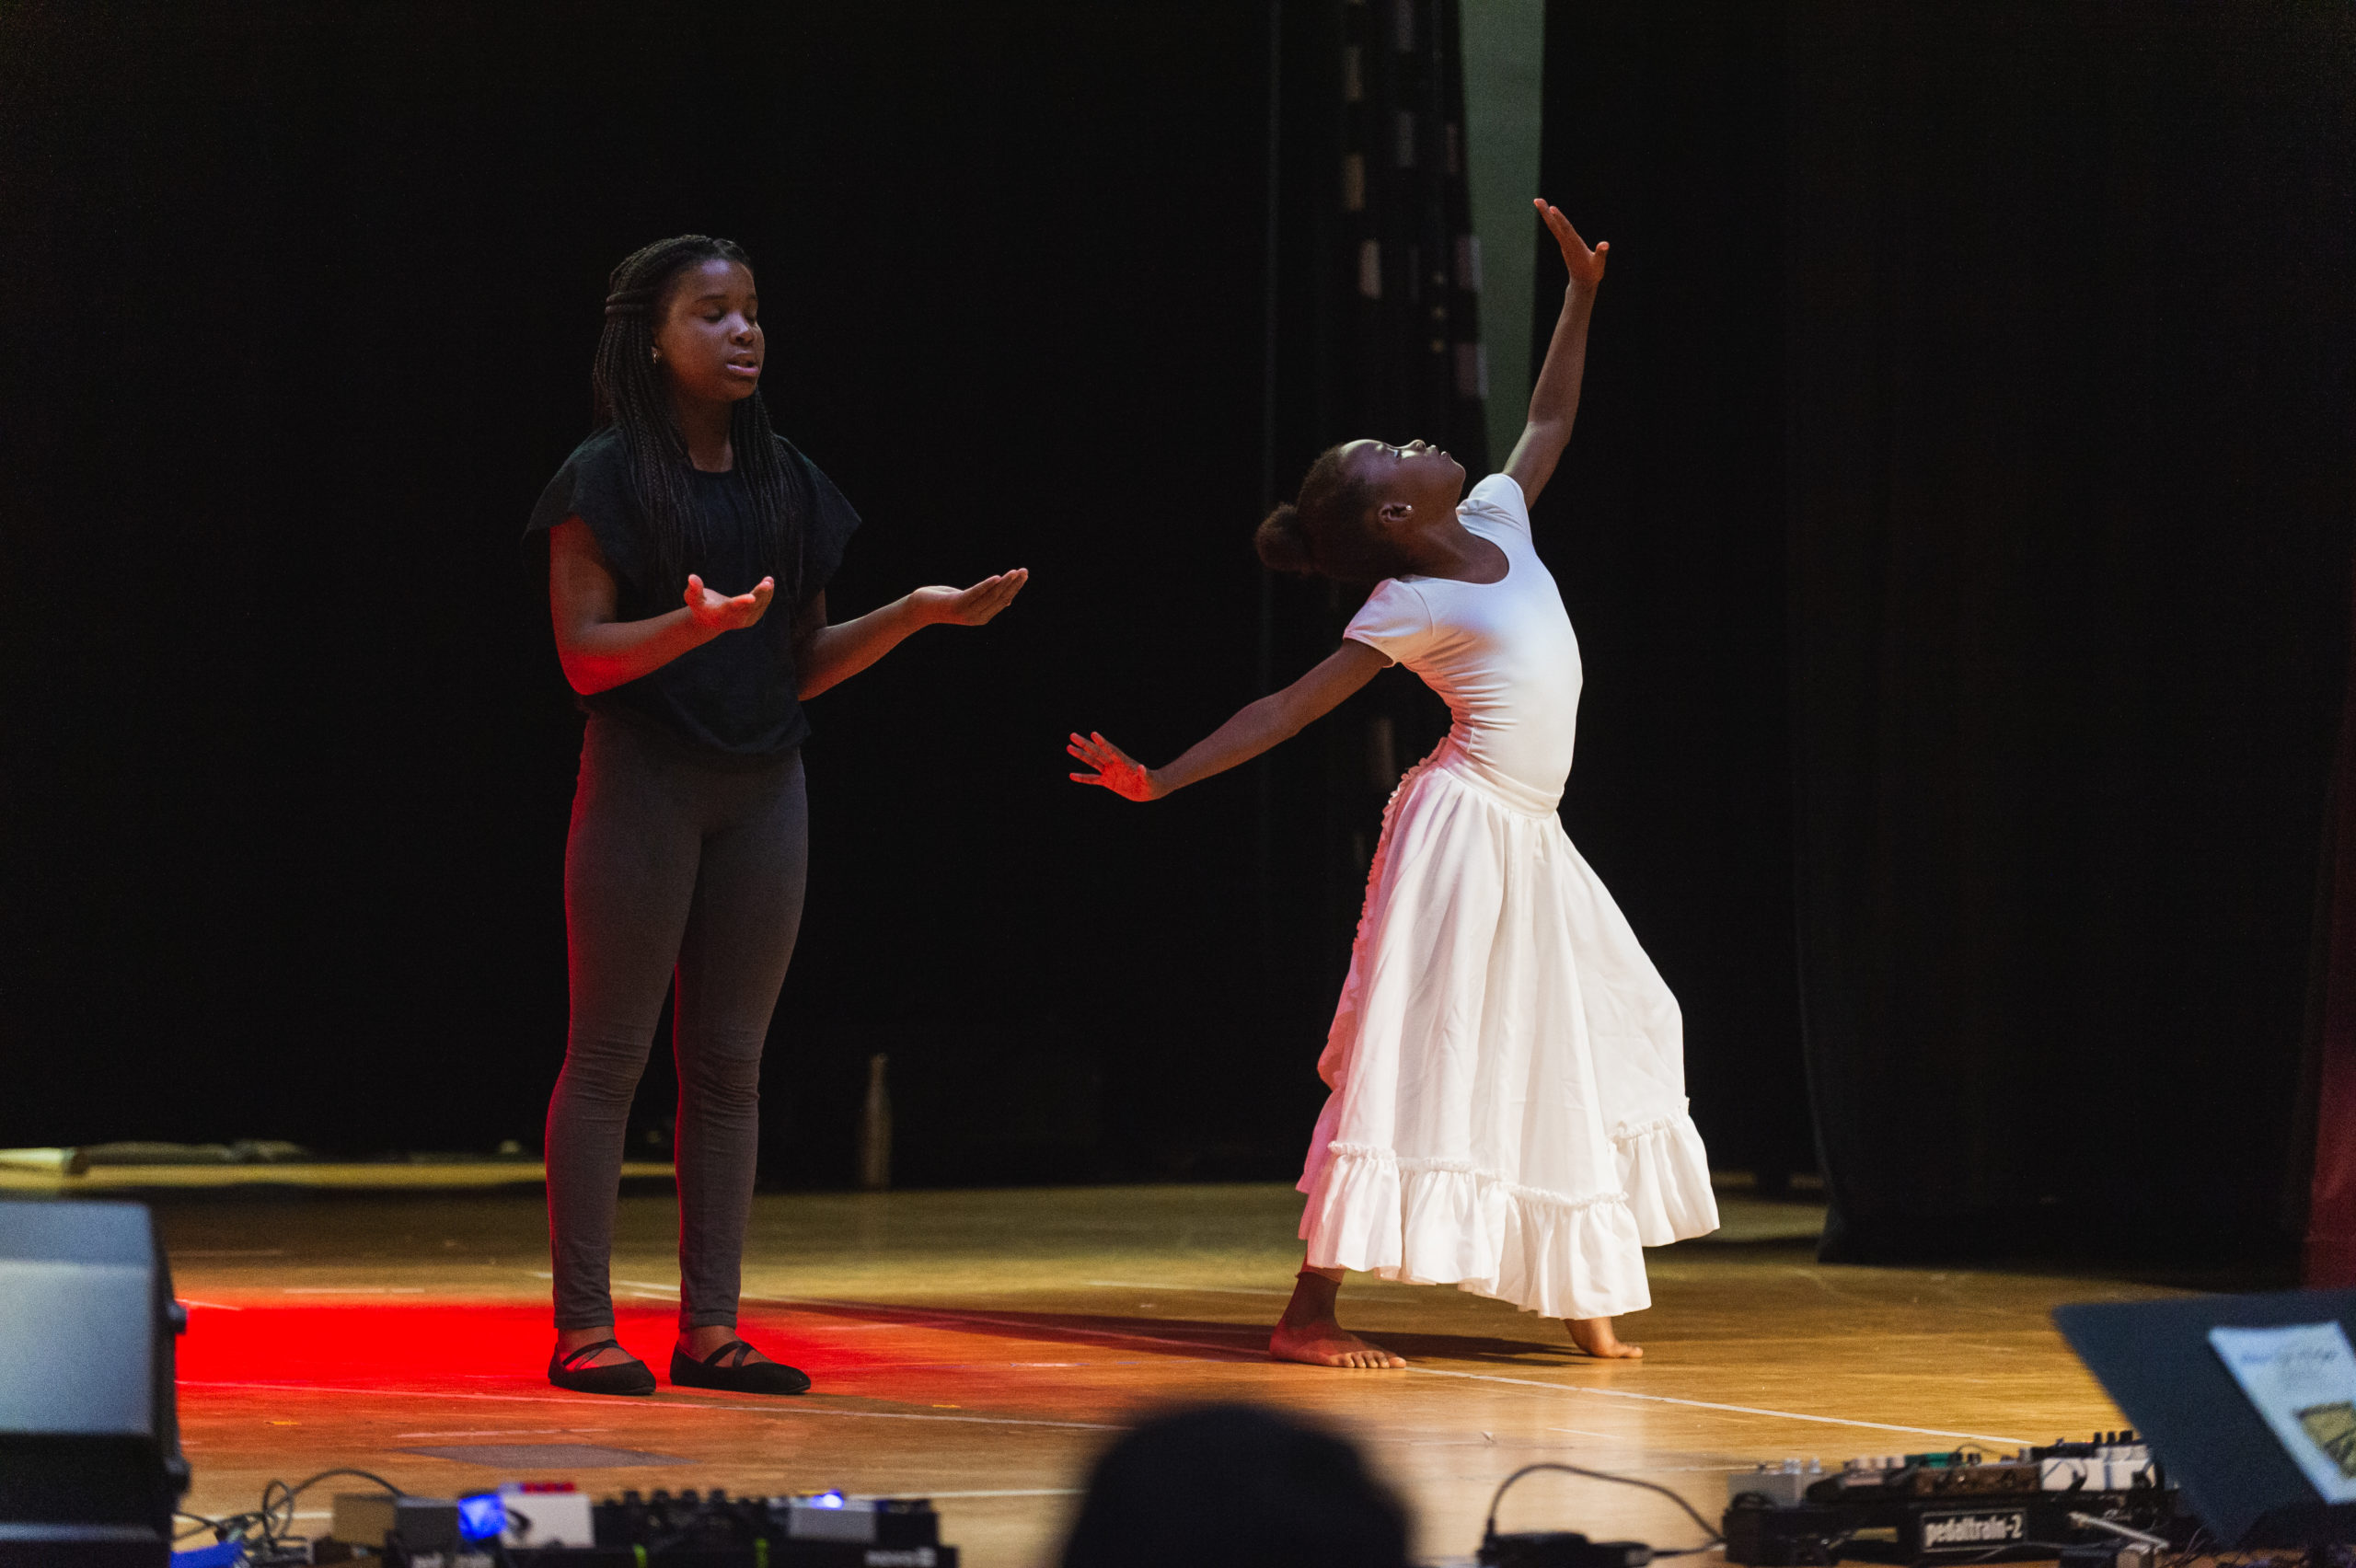 The Kennedy Center Young woman performing on a stage in white dress with another young woman in a black and gray outfit